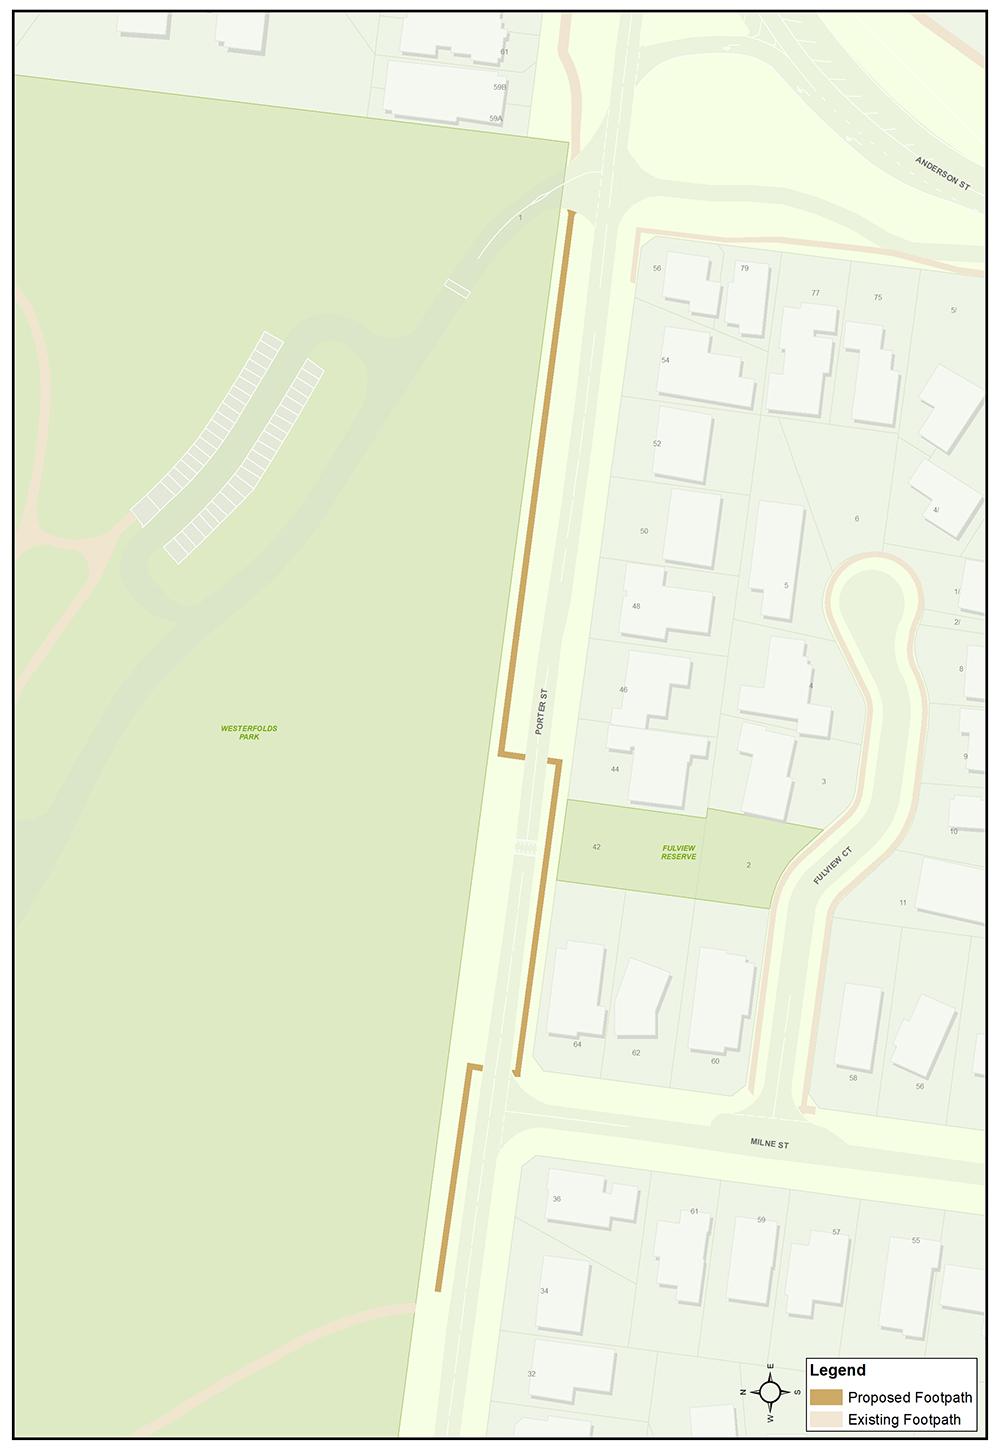 A map showing the location of the proposed footpath construction along Porter Street, Templestowe.